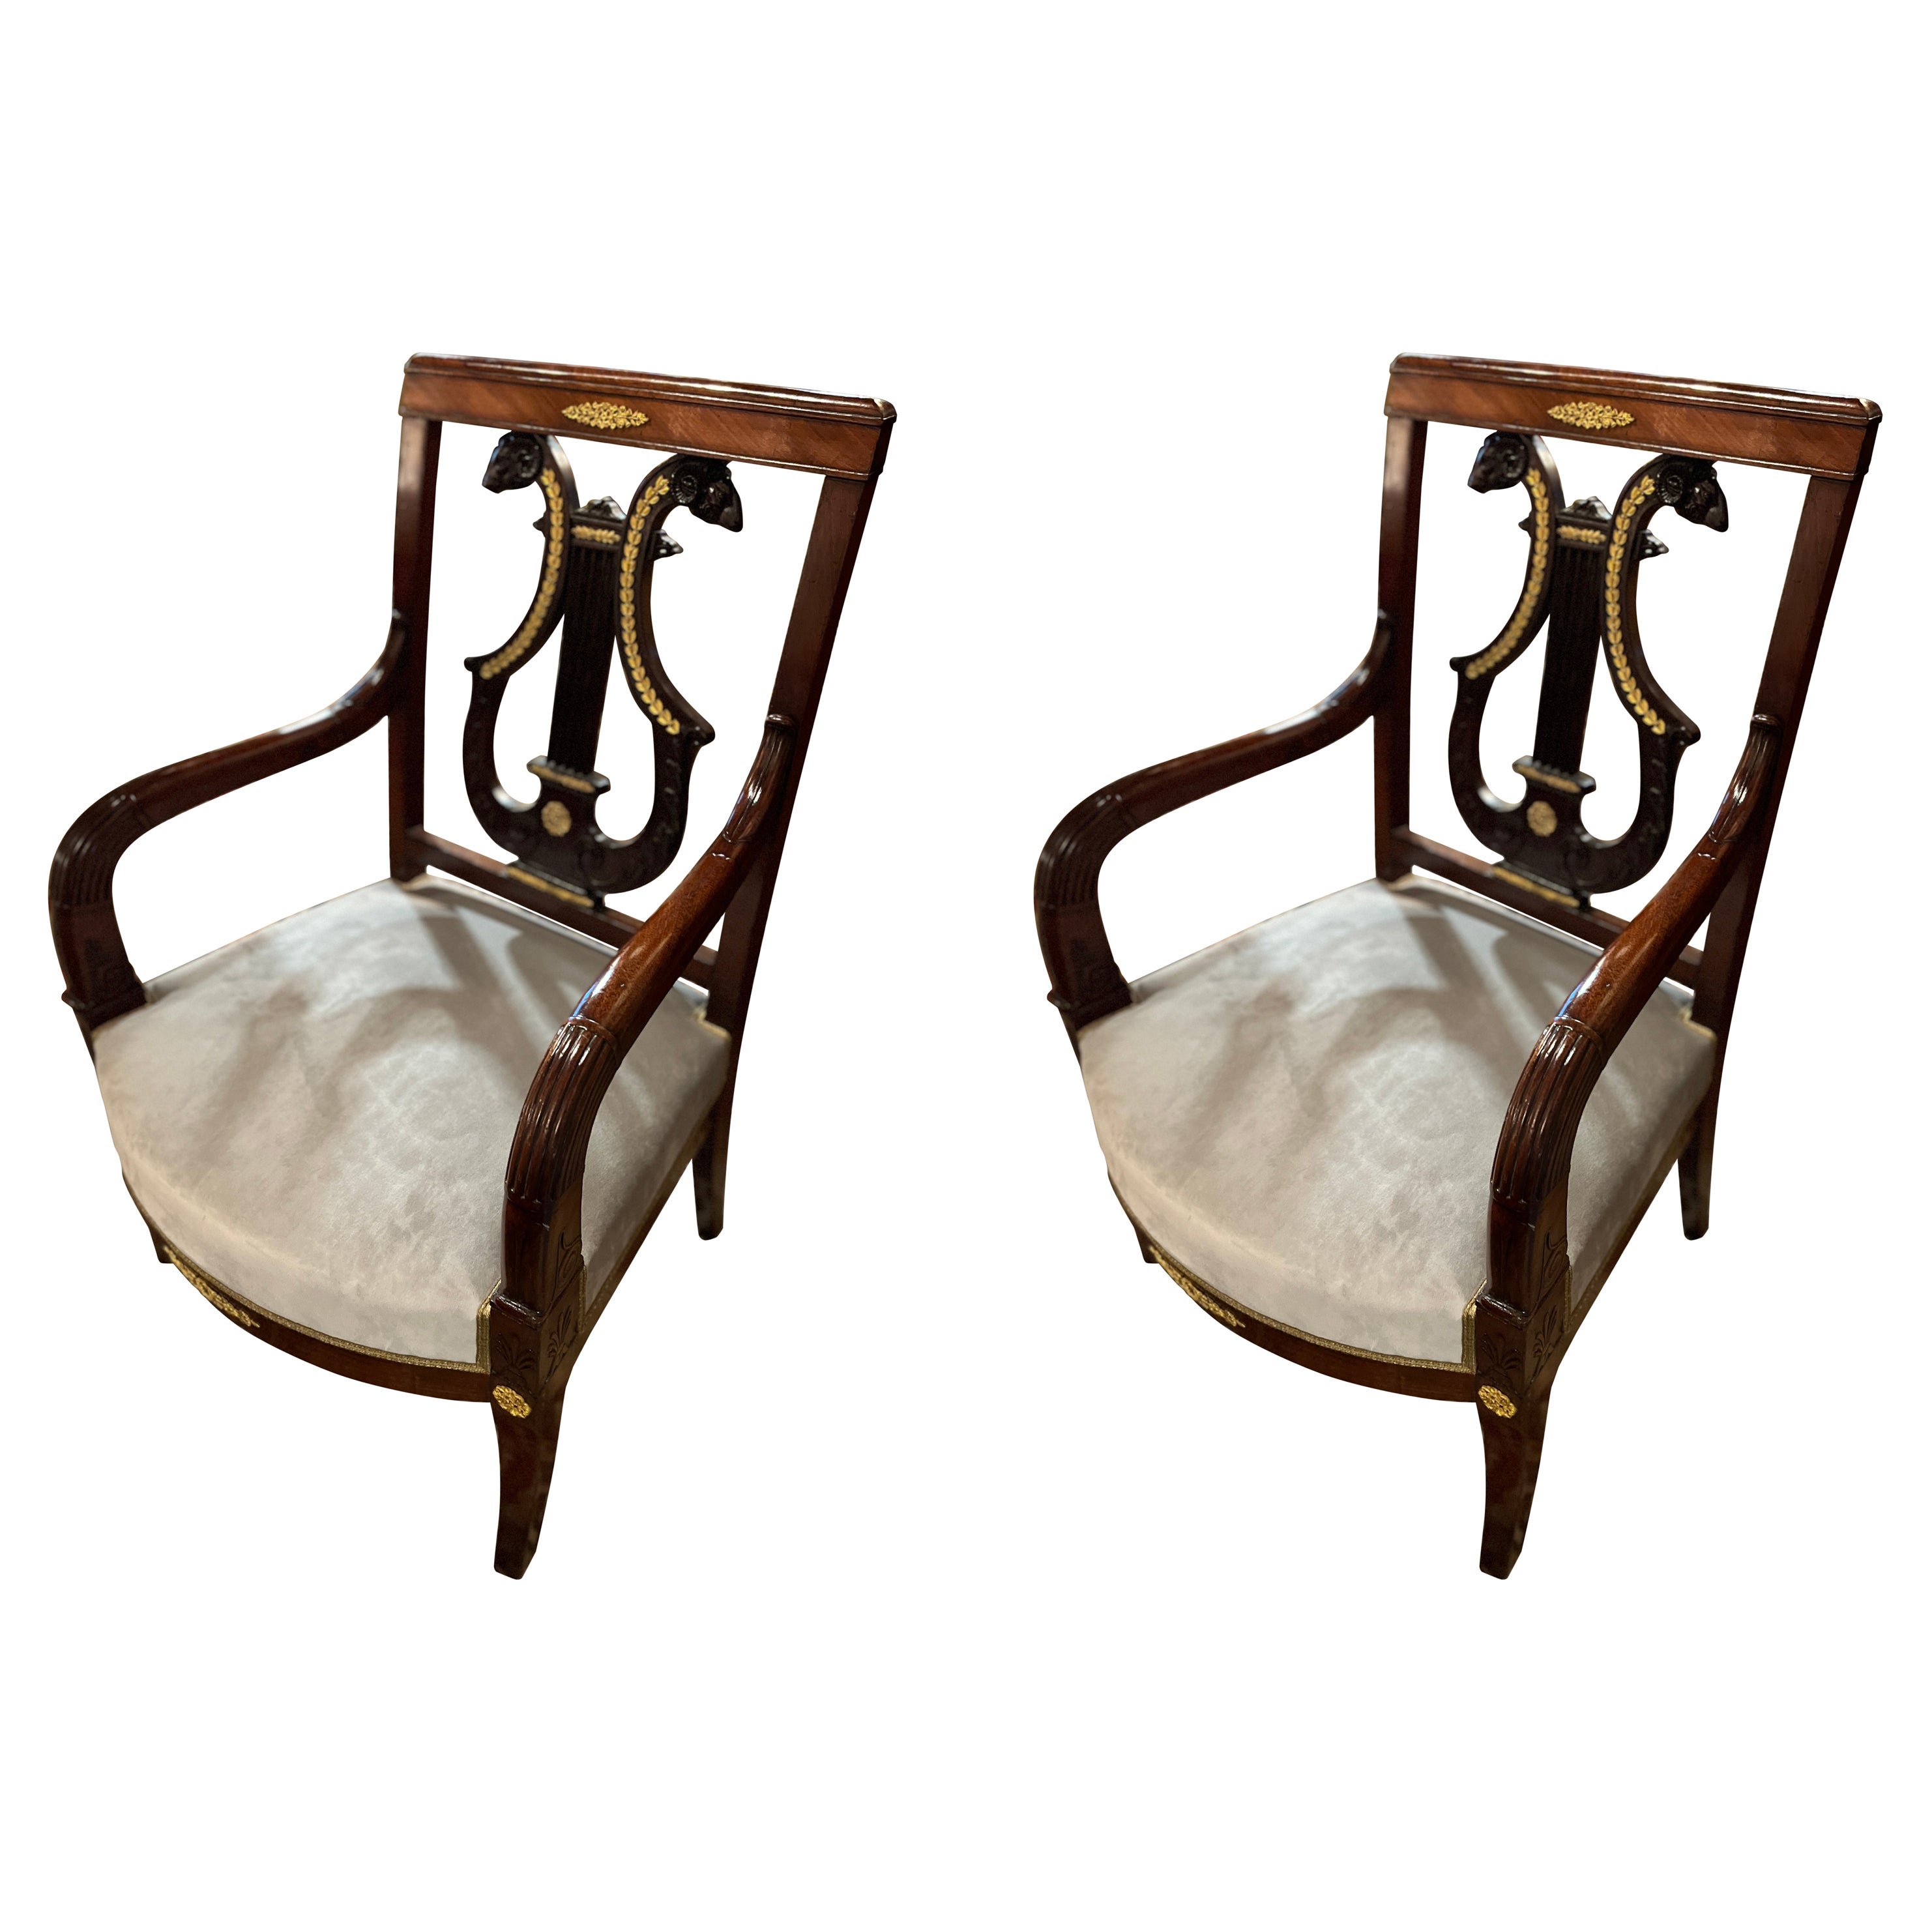 Pair of 19th Century Mahogany French Regence Library Chairs